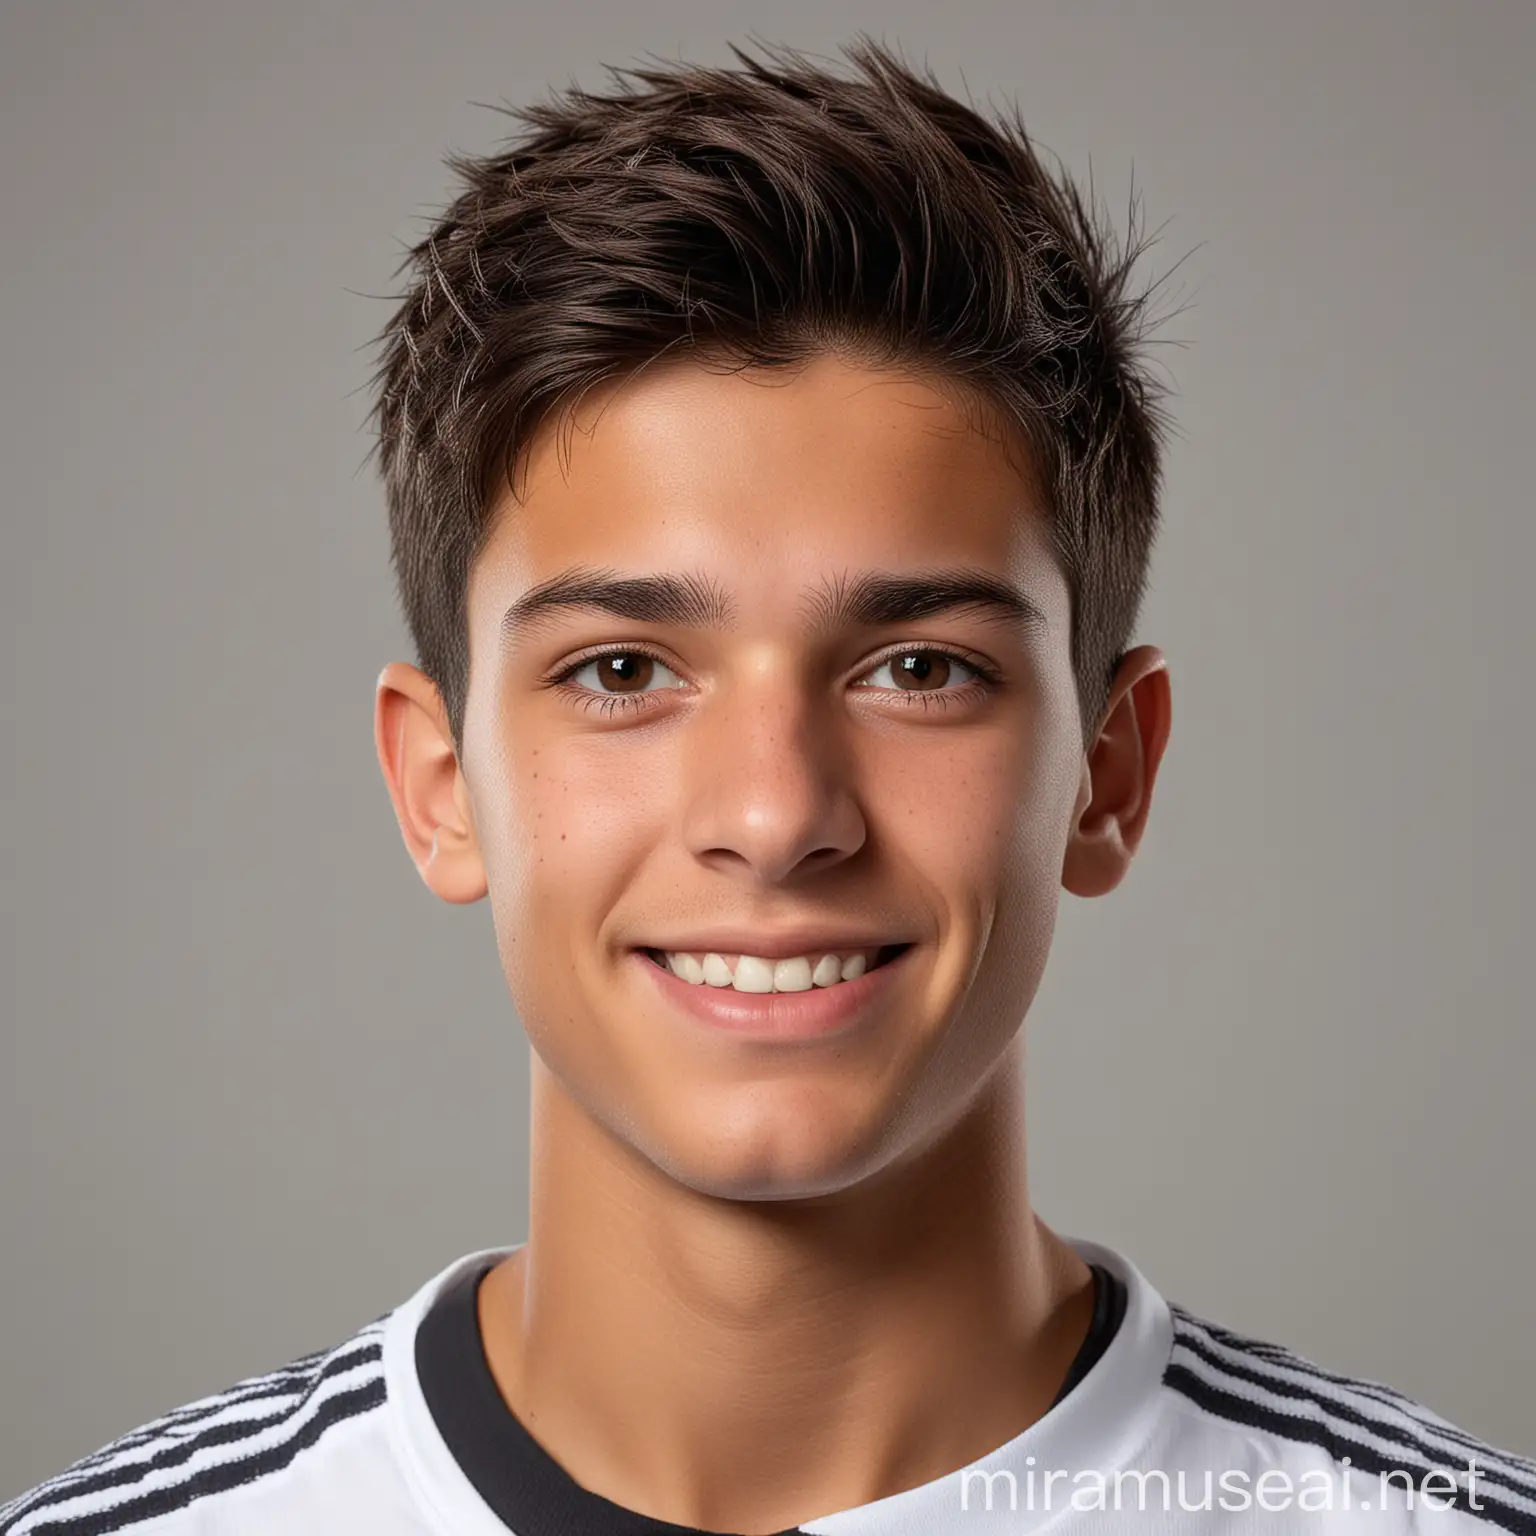 Portrait of Smiling Portuguese Teen Soccer Player in White Shirt on Grey Background